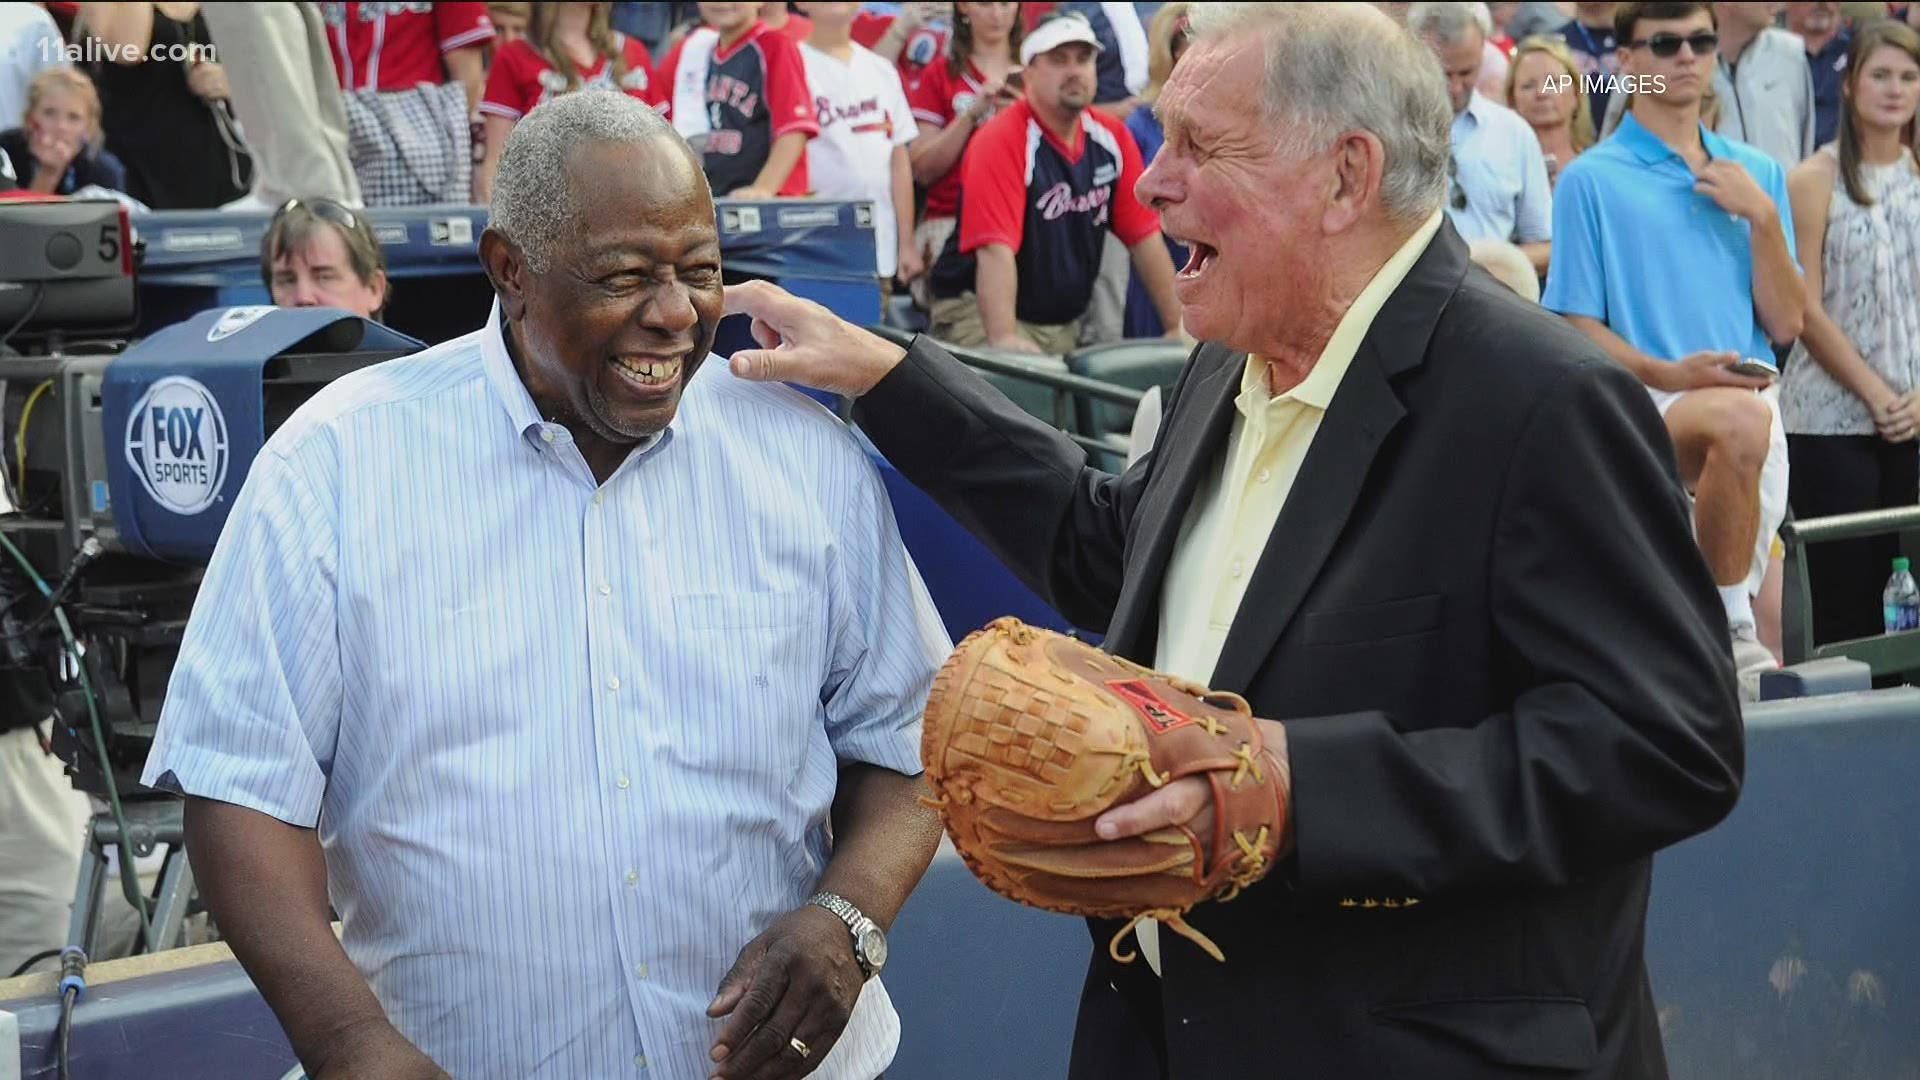 In the past year, we've lost Joseph Lowery, John Lewis, Rev. C.T. Vivian and now Hank Aaron.